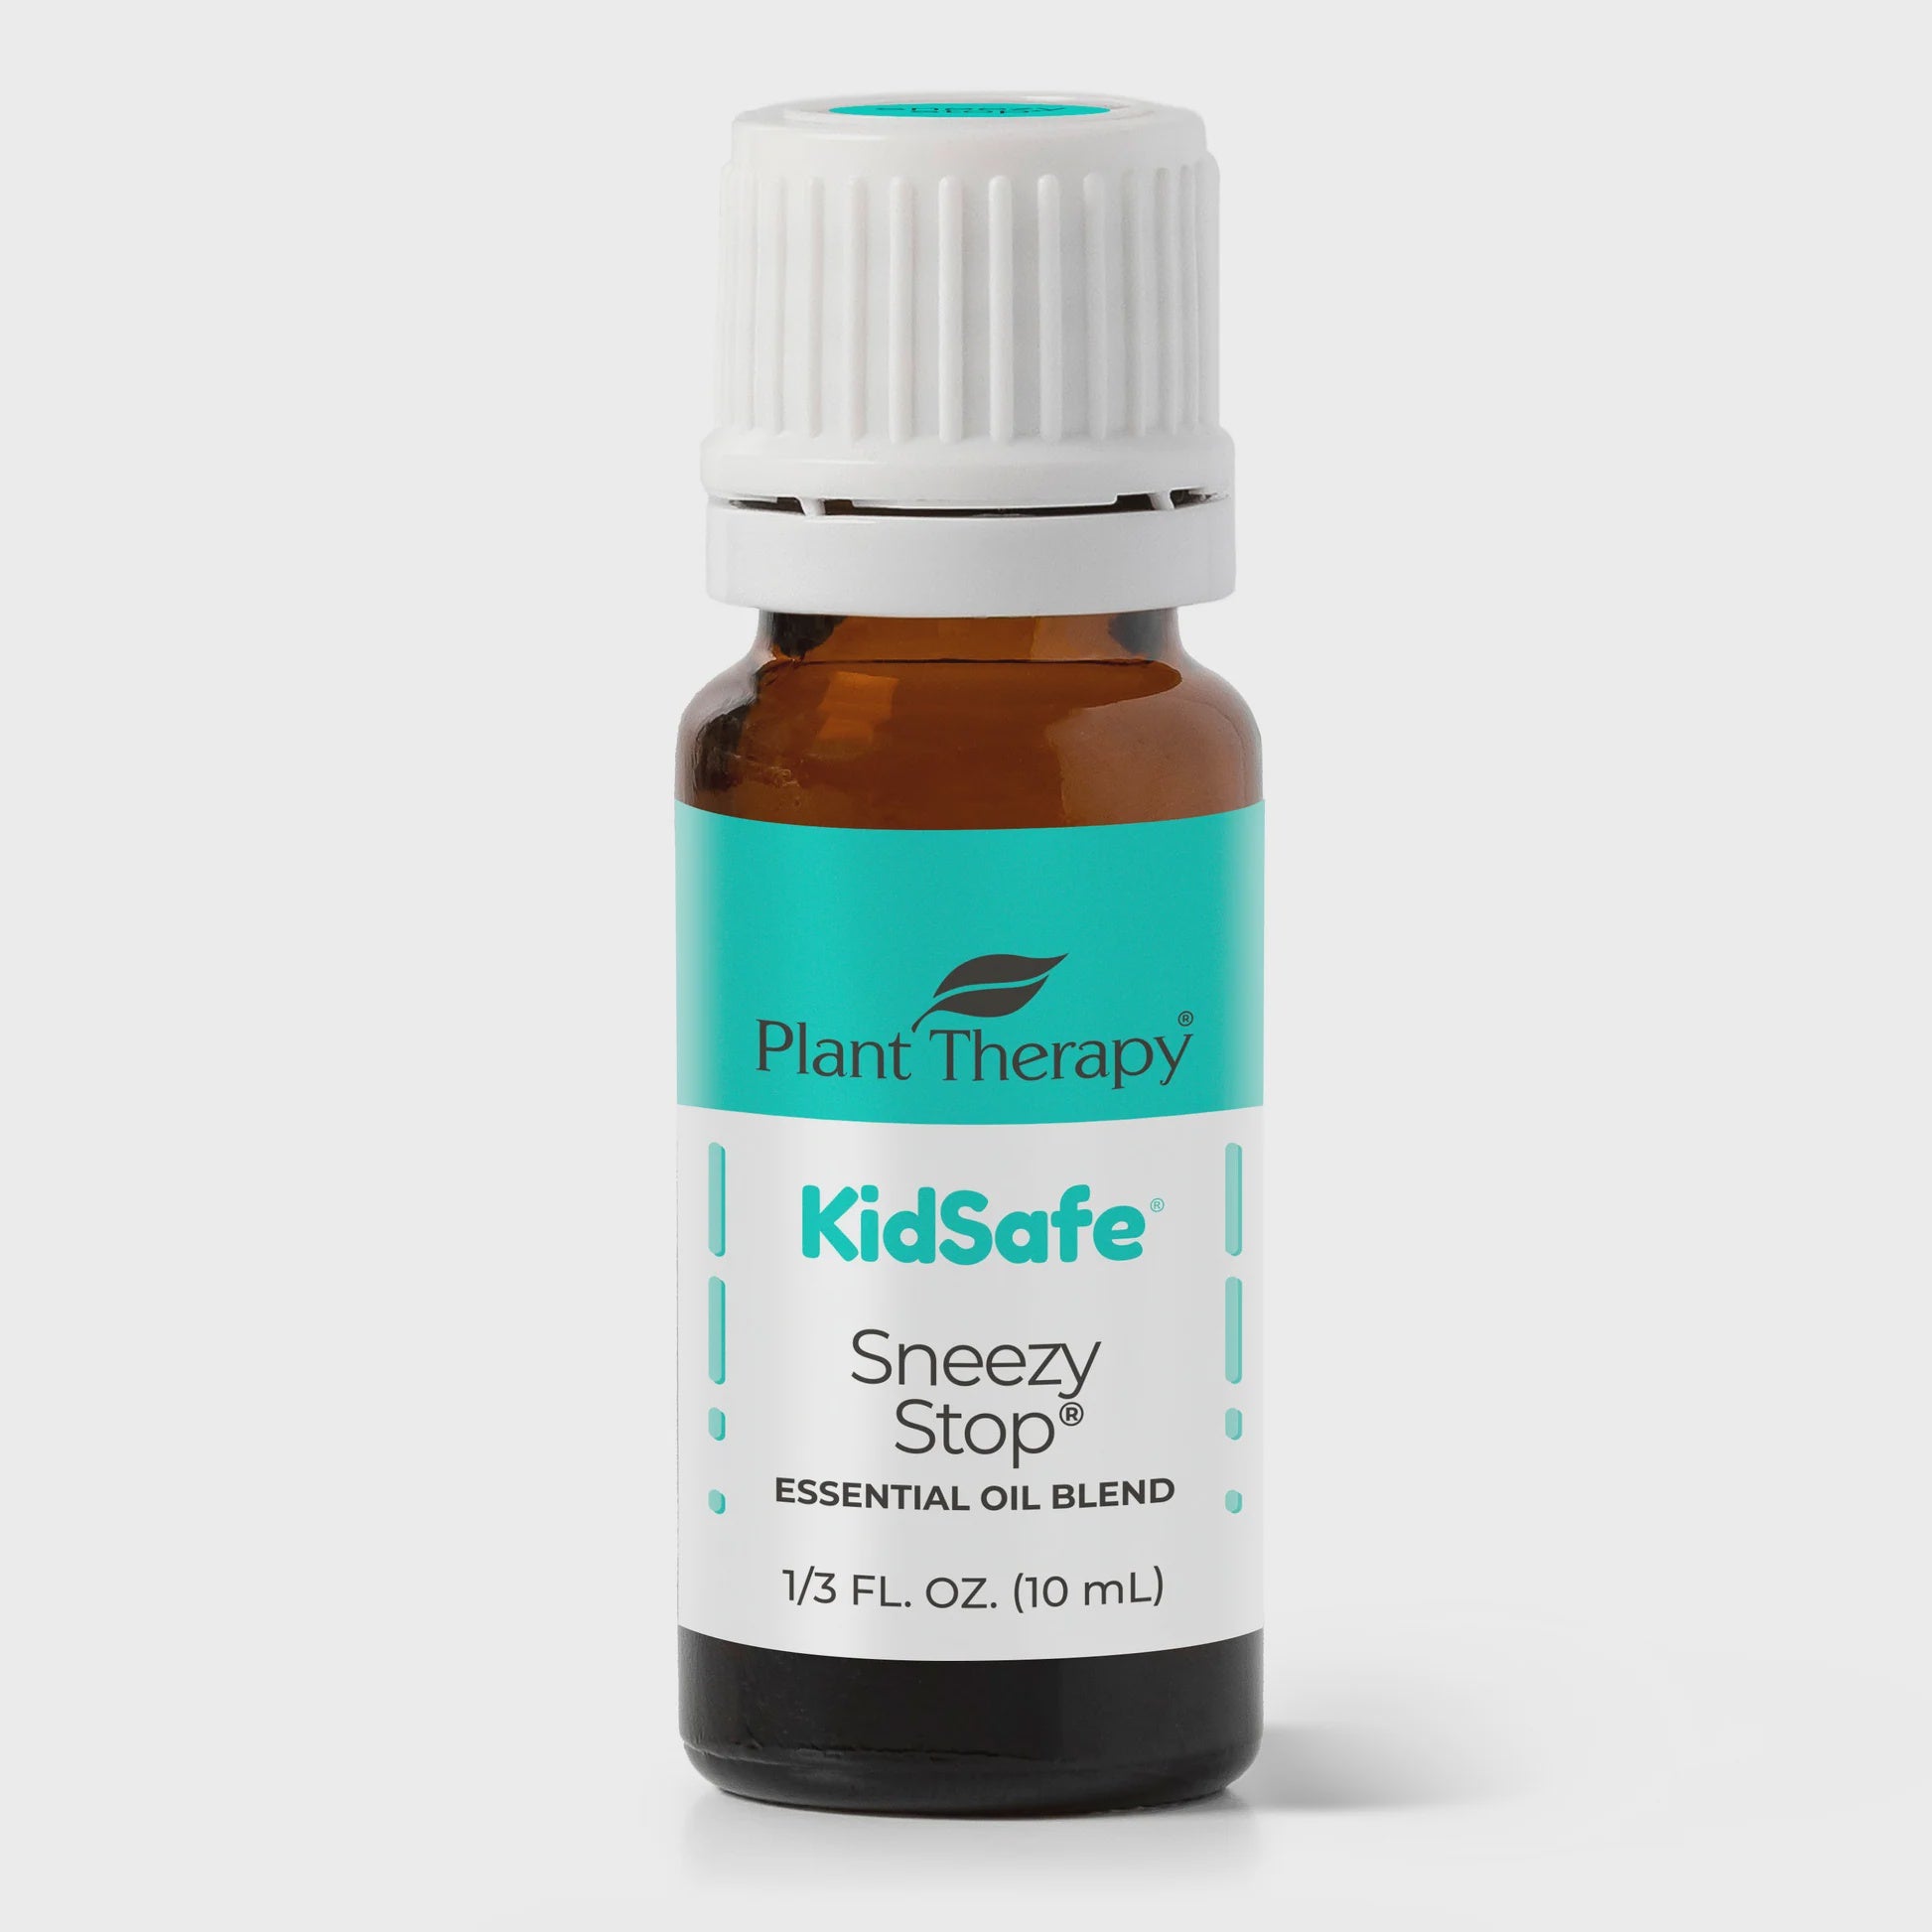 Plant Therapy Sneezy Stop KidSafe Essential Oil 10ML